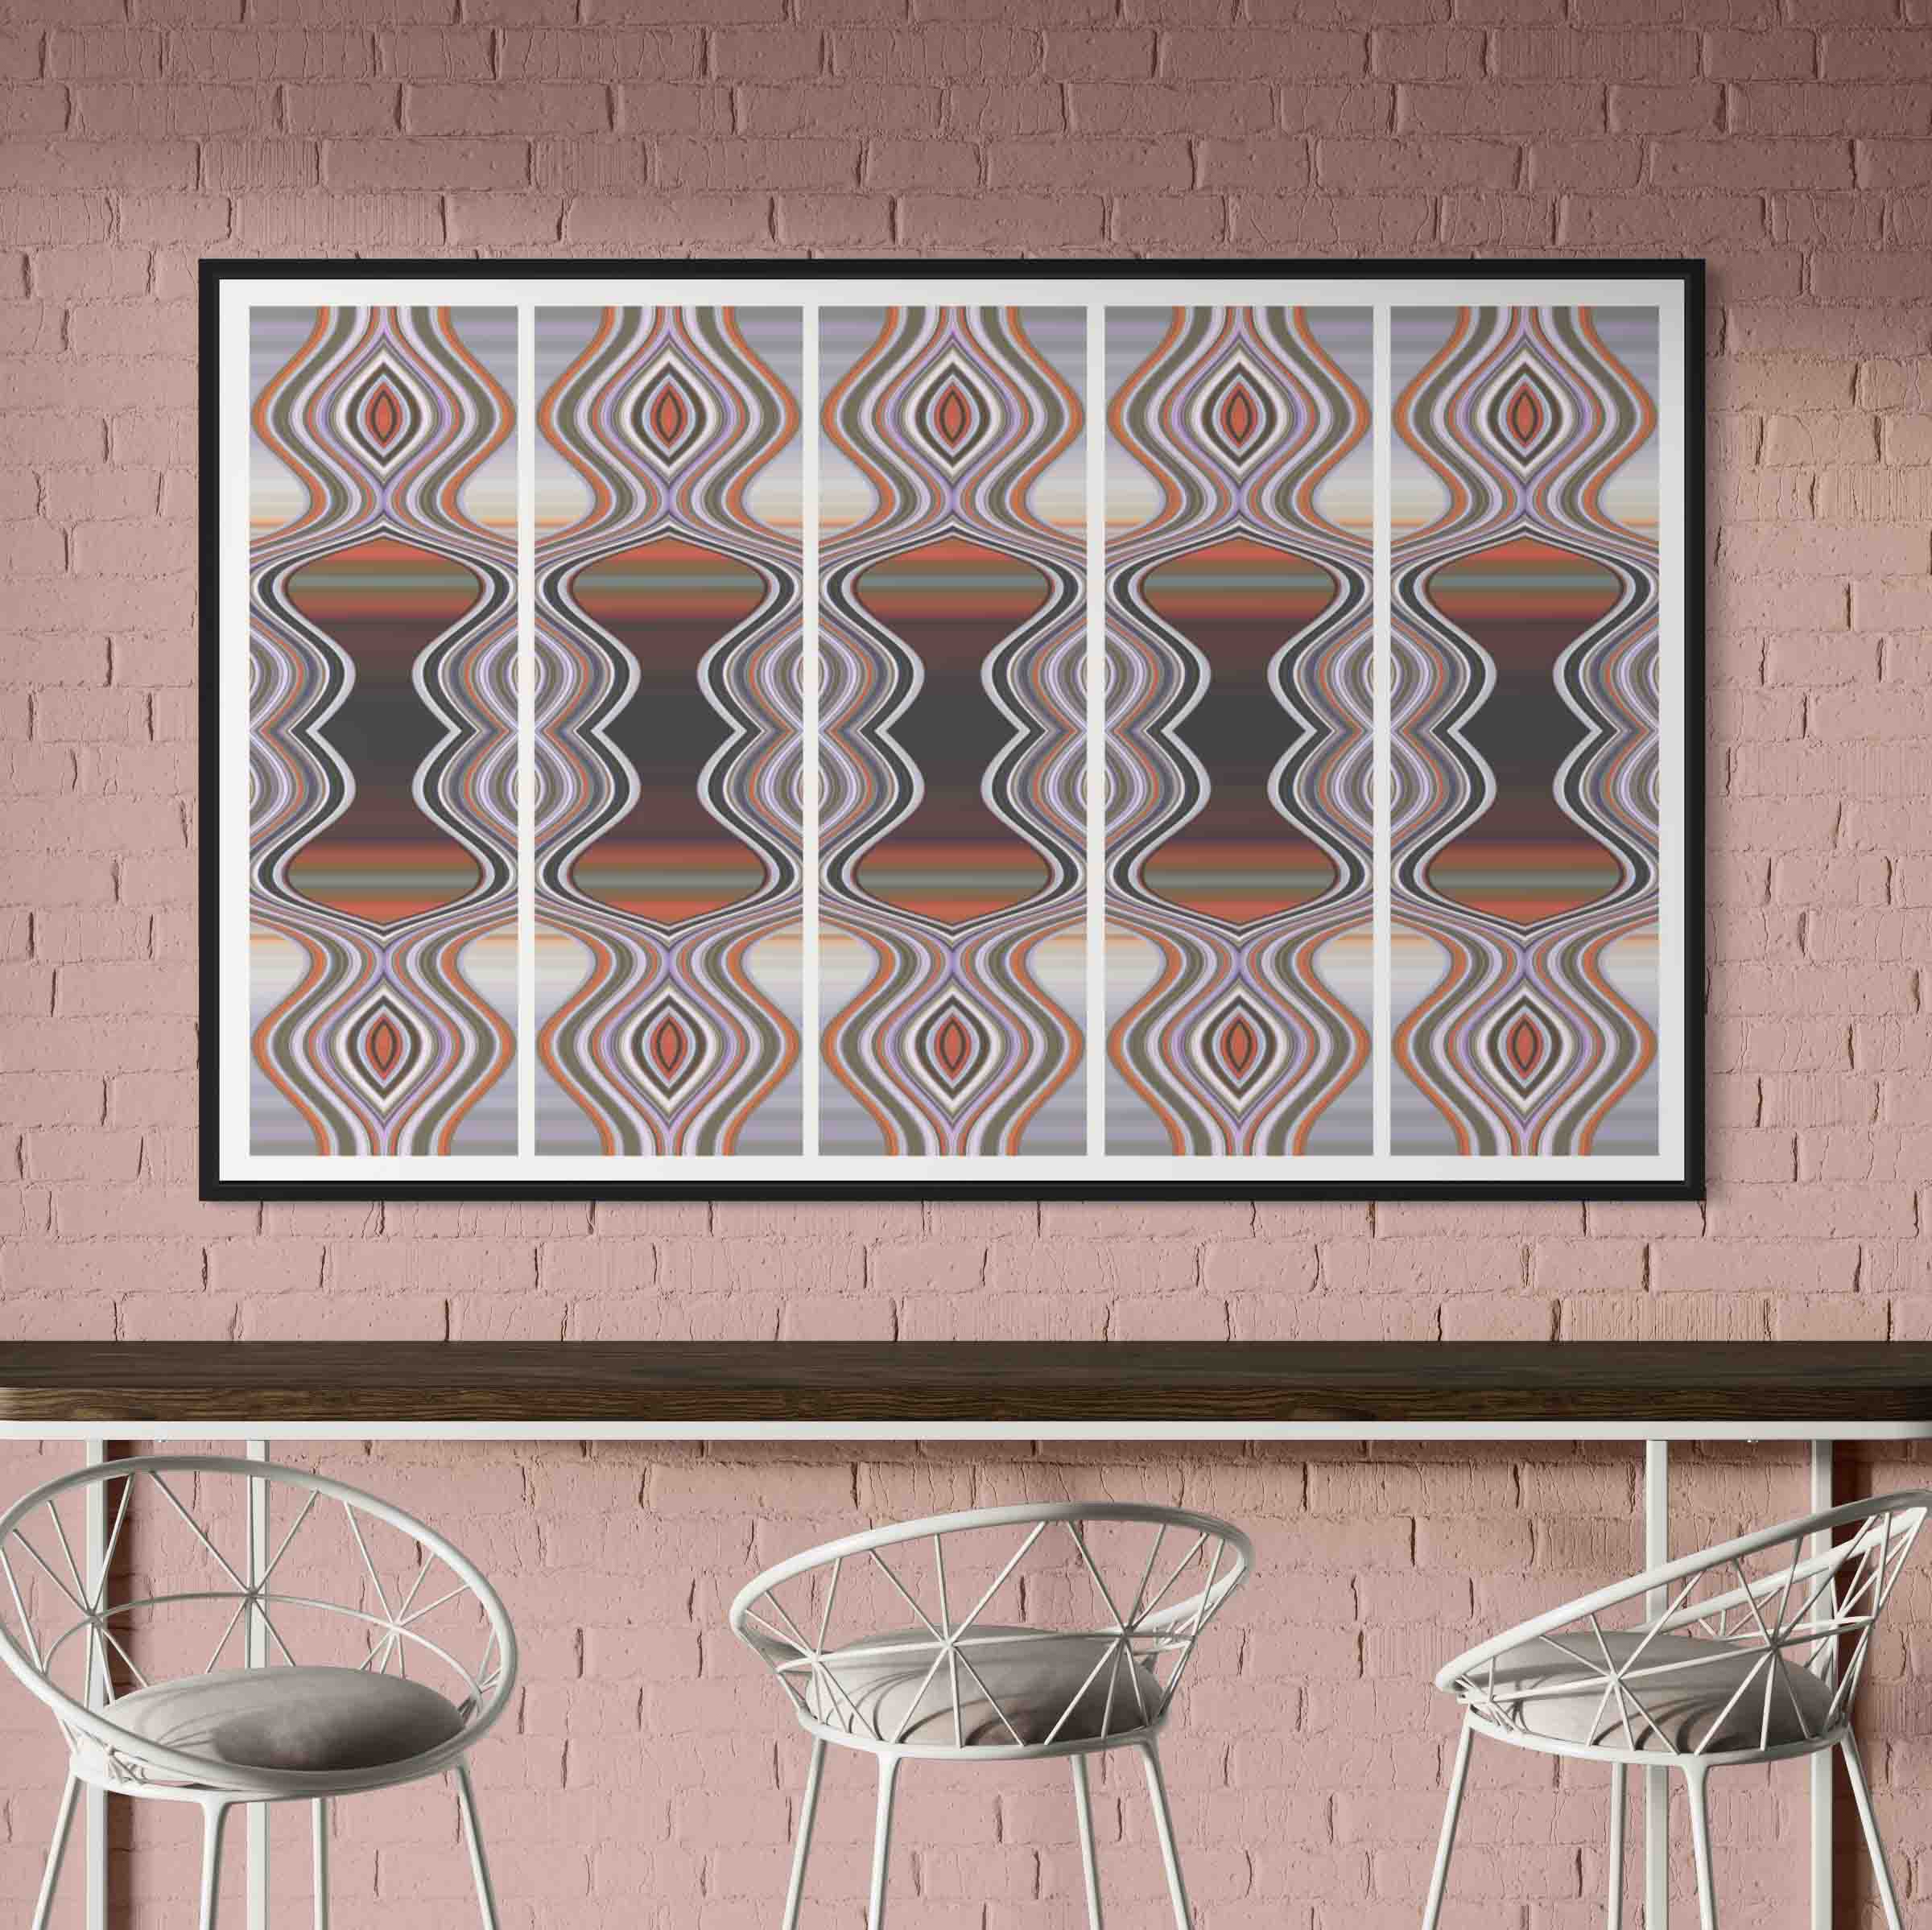 A wall with a picture of some chairs and tables